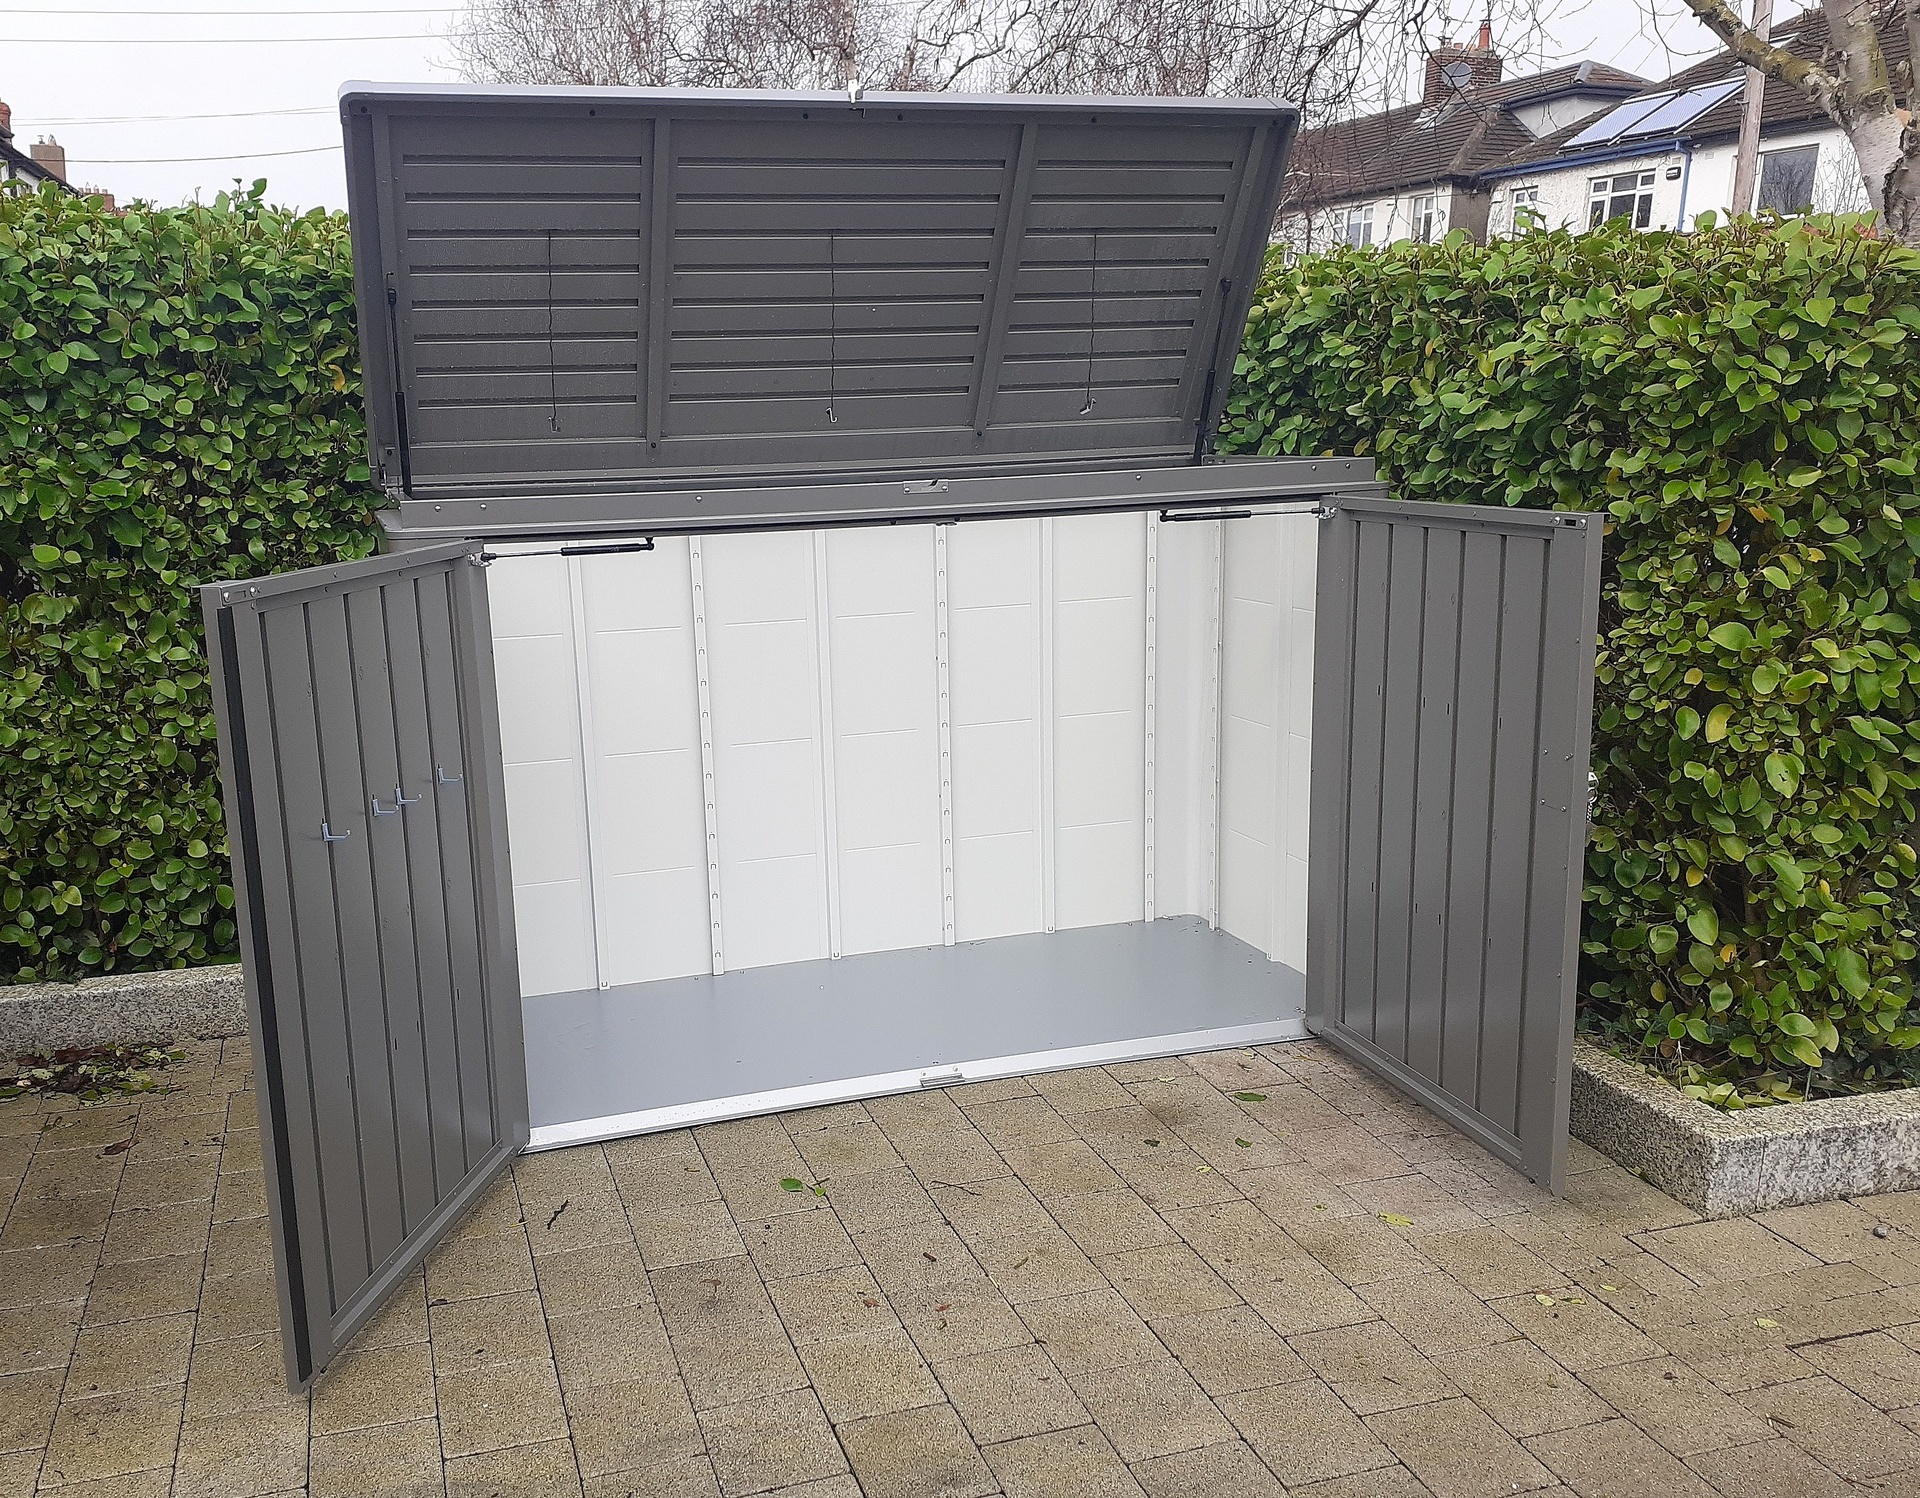 Biohort HighBoard 200 - exceptional quality, blending functionality, durability and sleek design to create stylish, secure & weatherproof bike storage solution  |  Supplied + Fitted in Killester, Dublin 5 by Owen Chubb Landscapers - Ireland's premier Biohort Supplier & Installer.